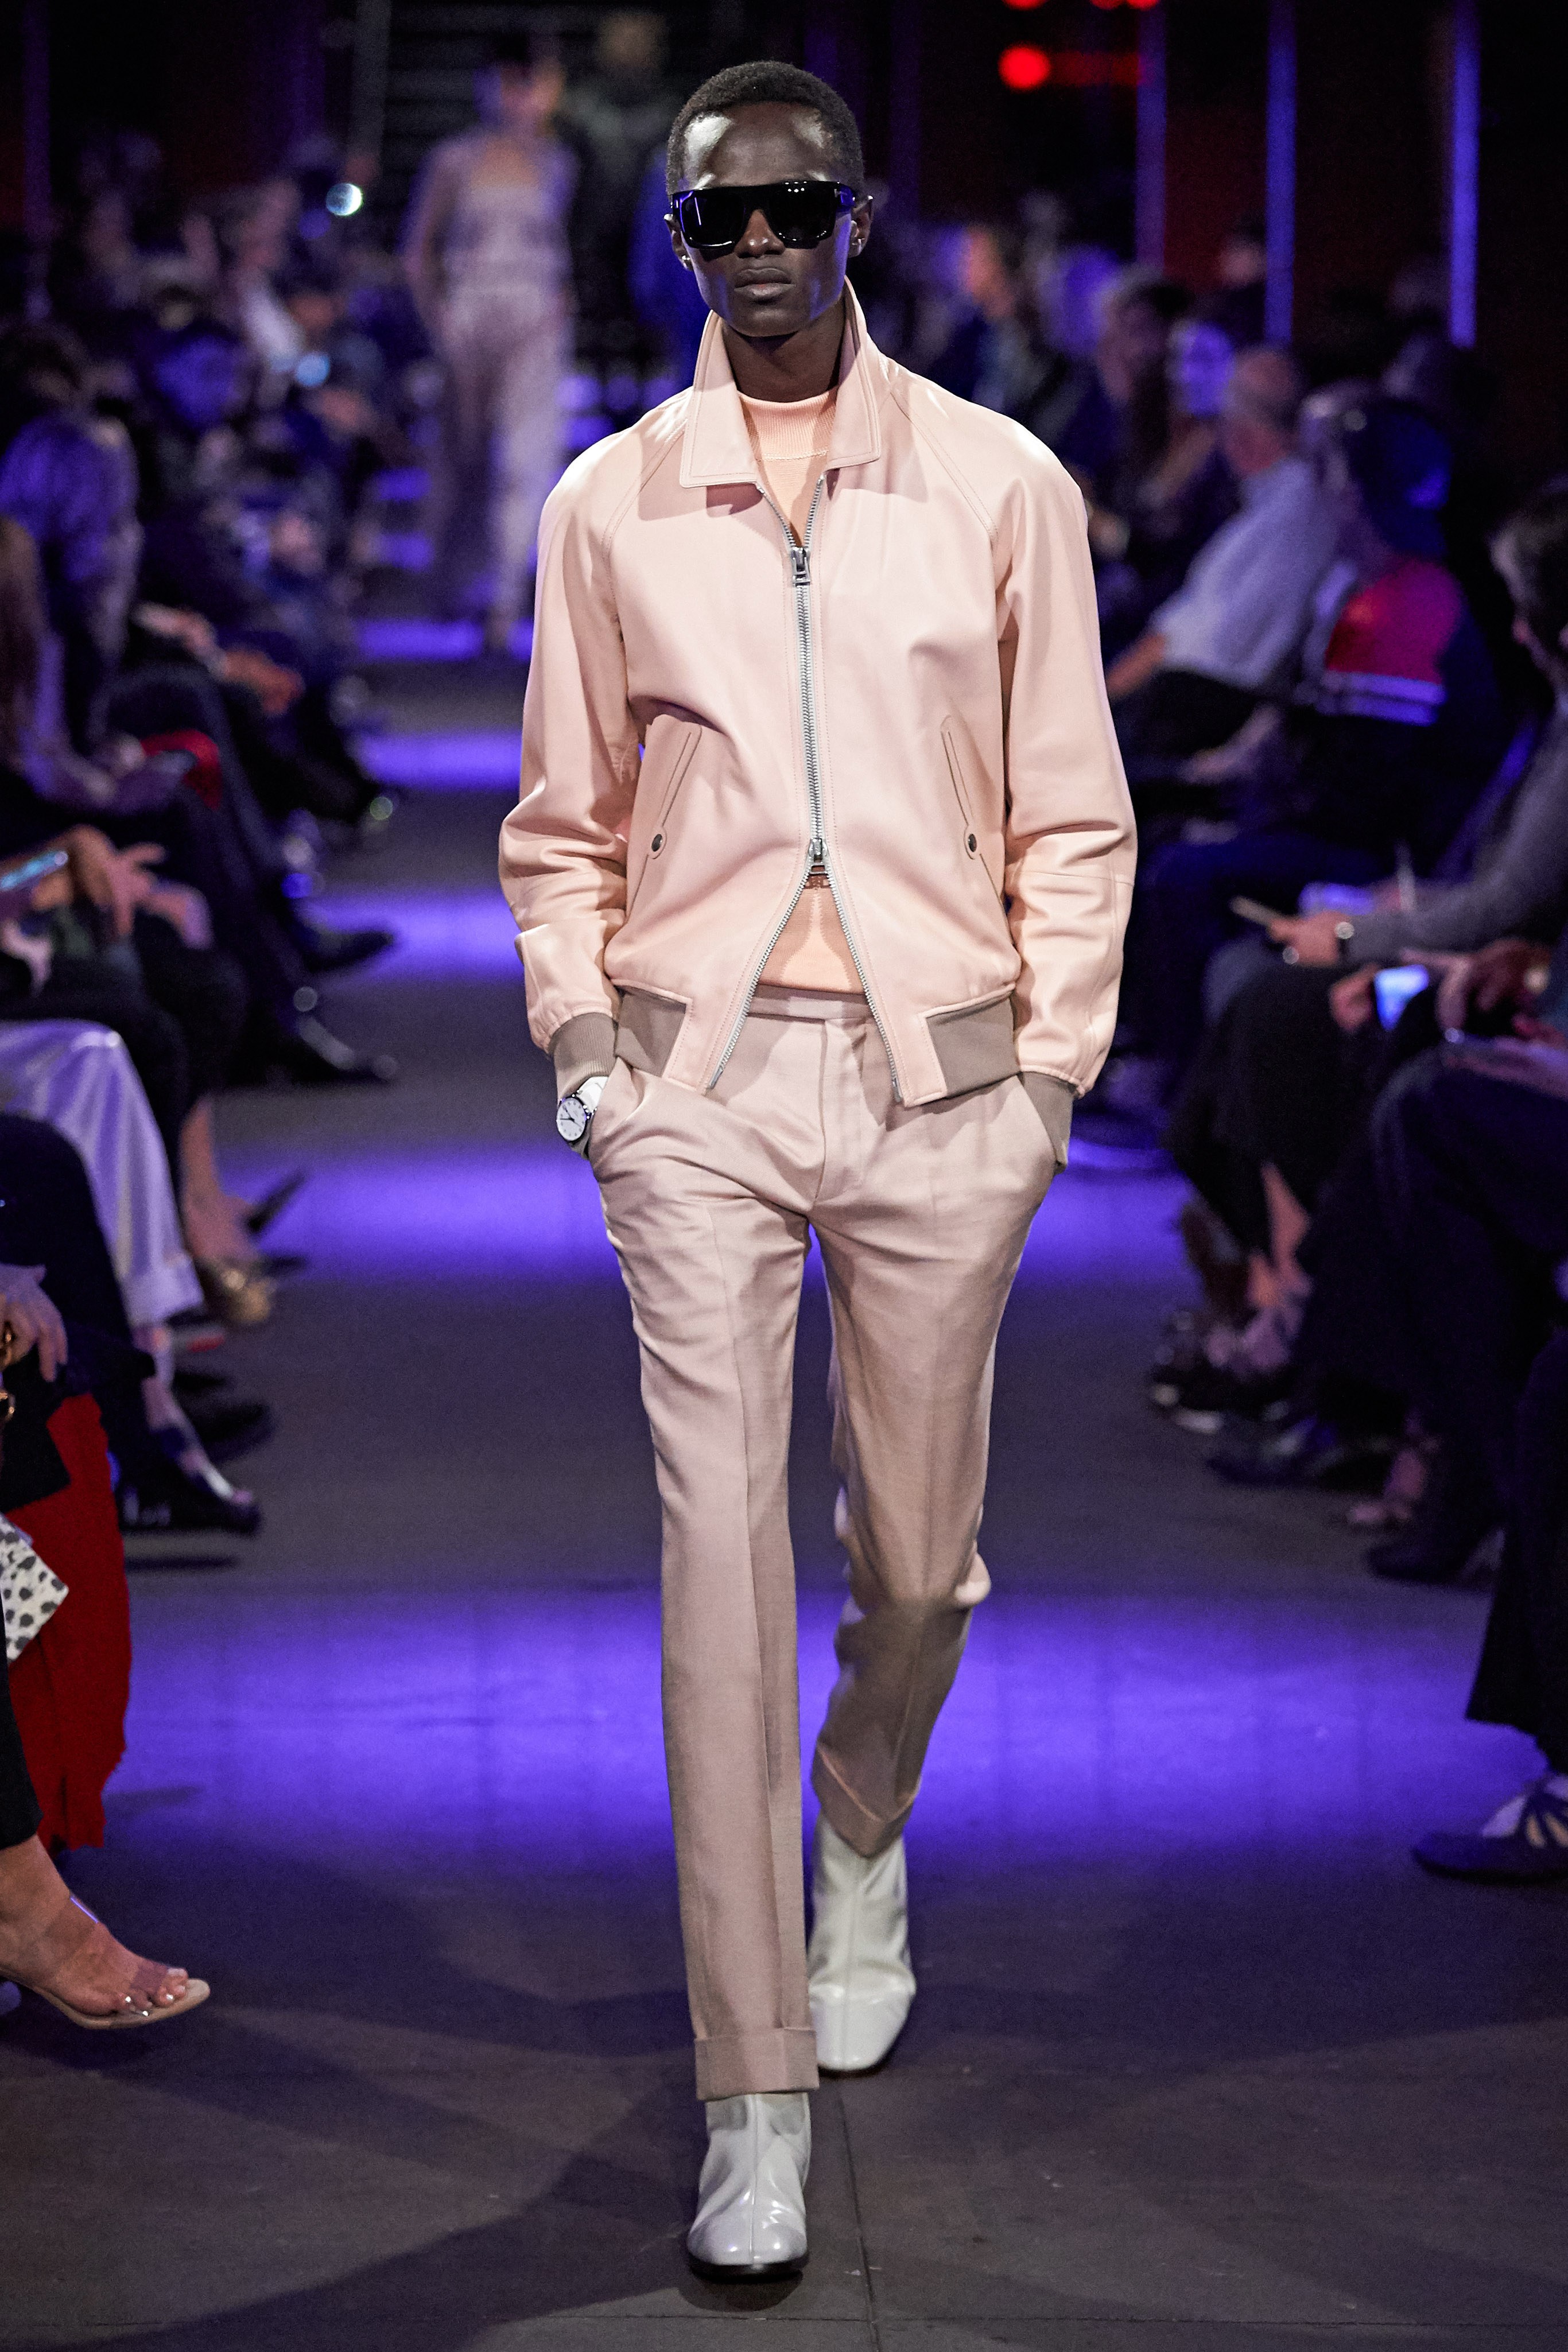 Tom Ford Spring 2020 ready-to-wear